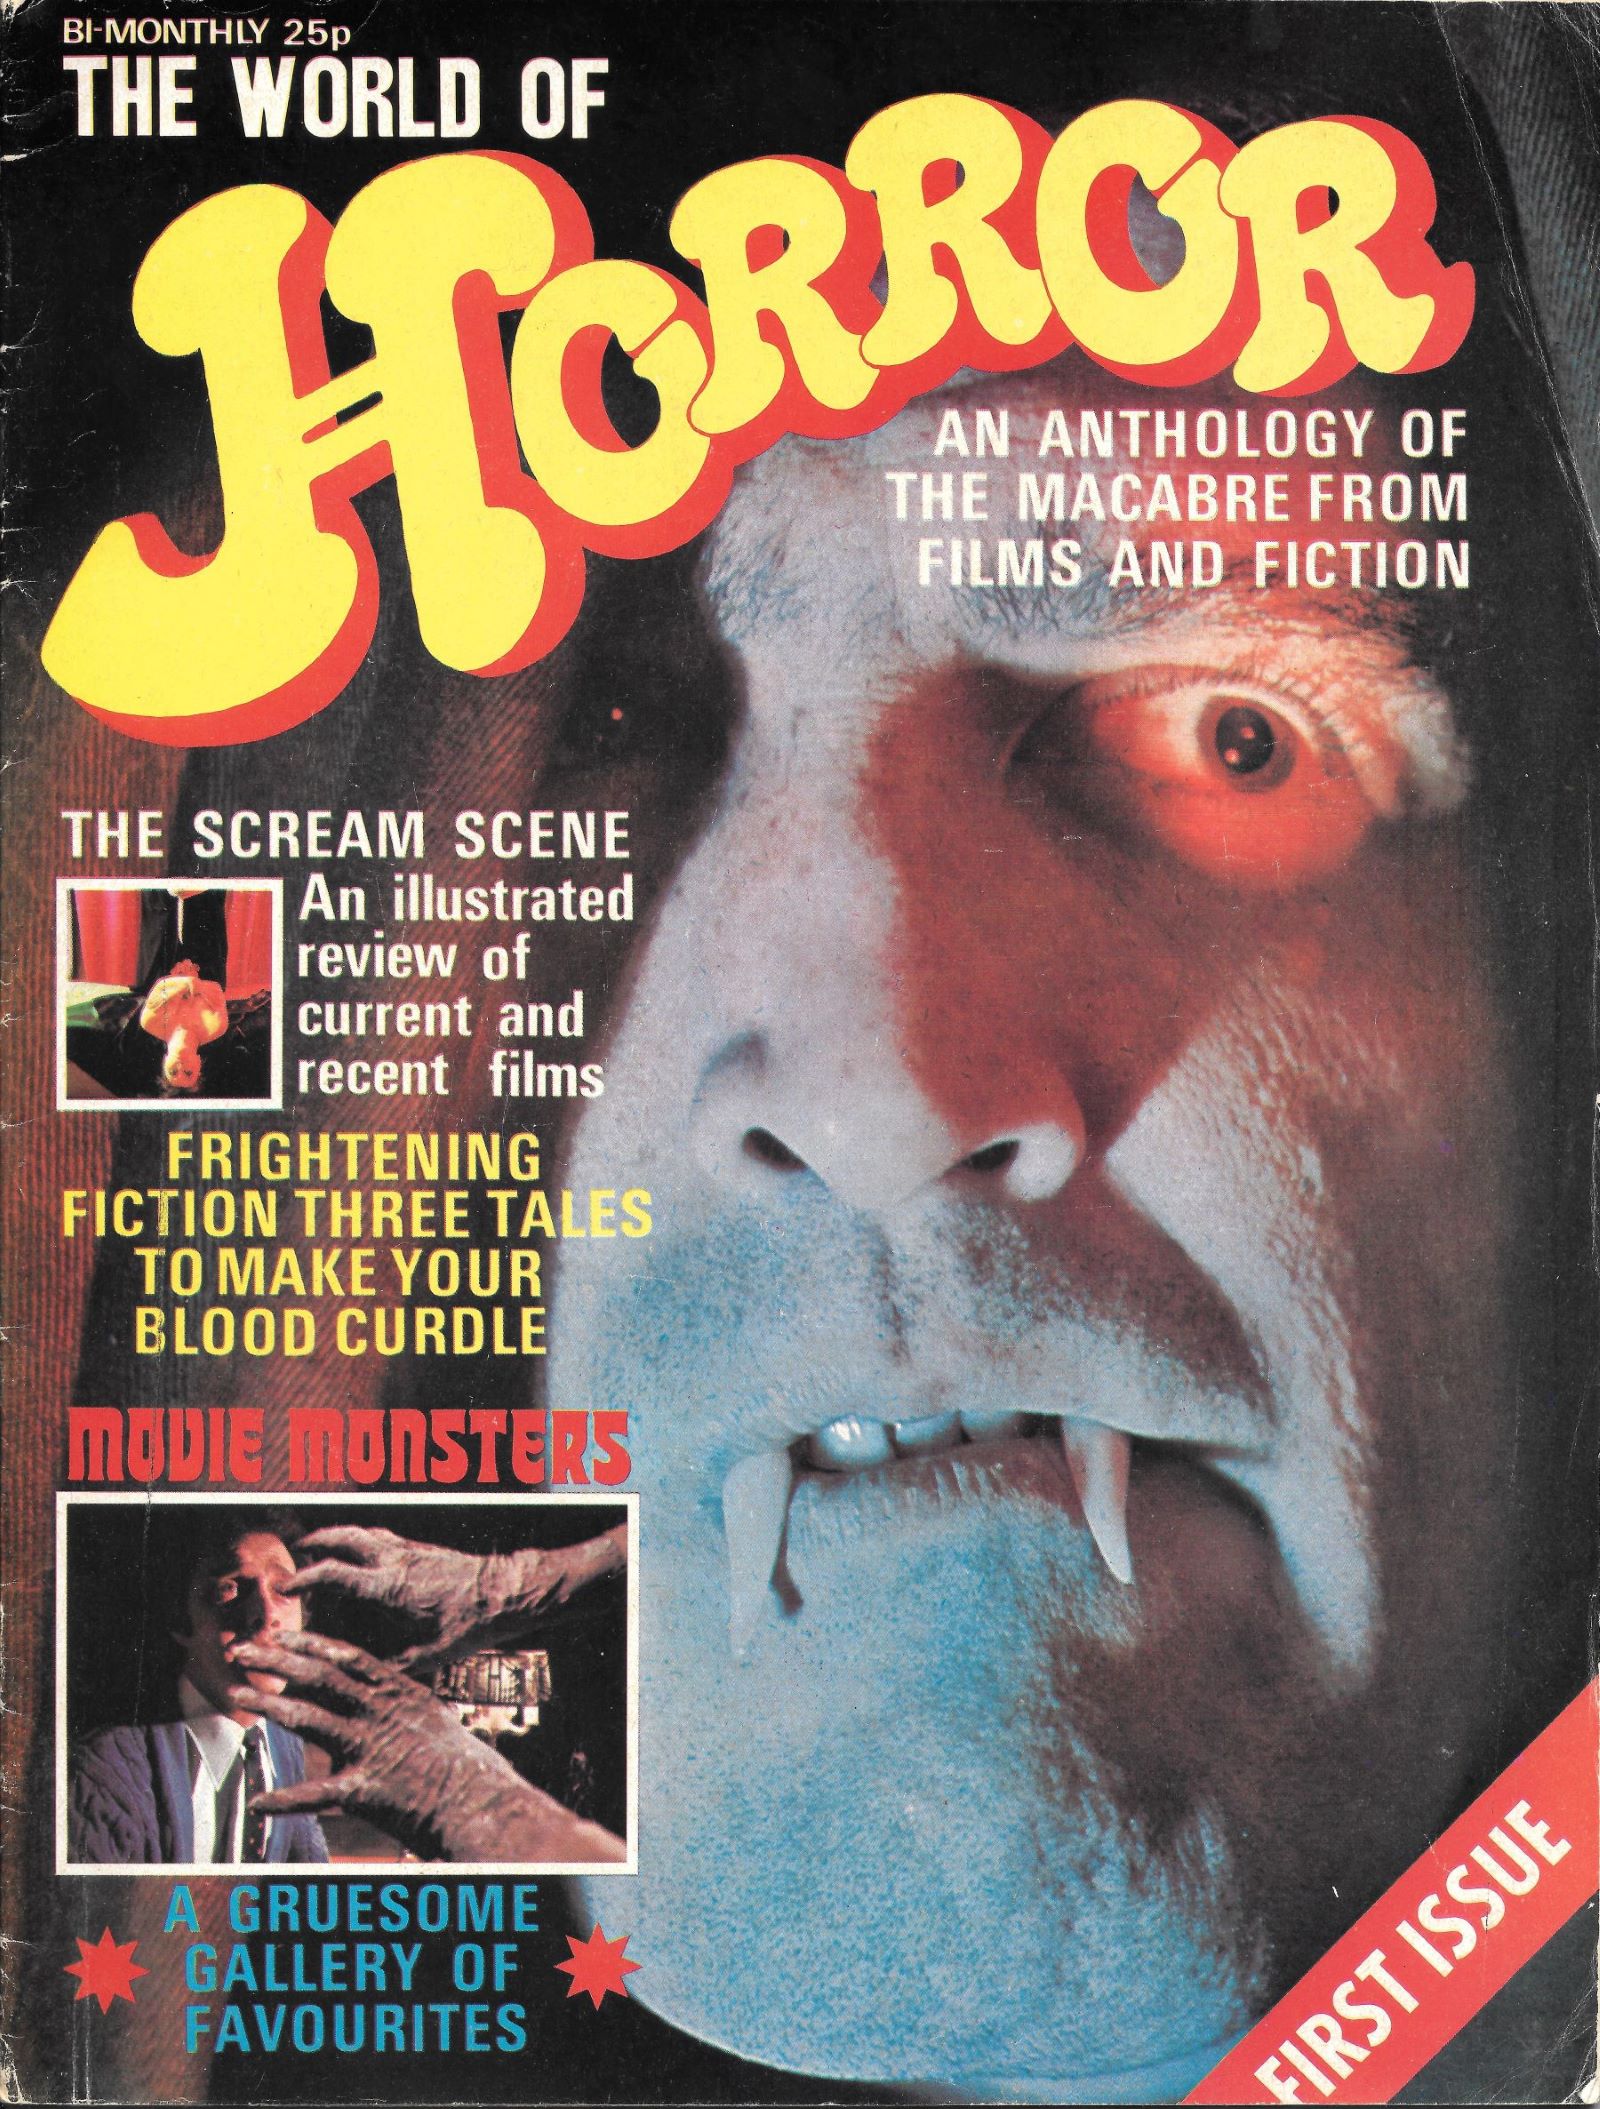 Monster Mash: Thrilling Pages from ‘World of Horror’ Magazine 1974-75